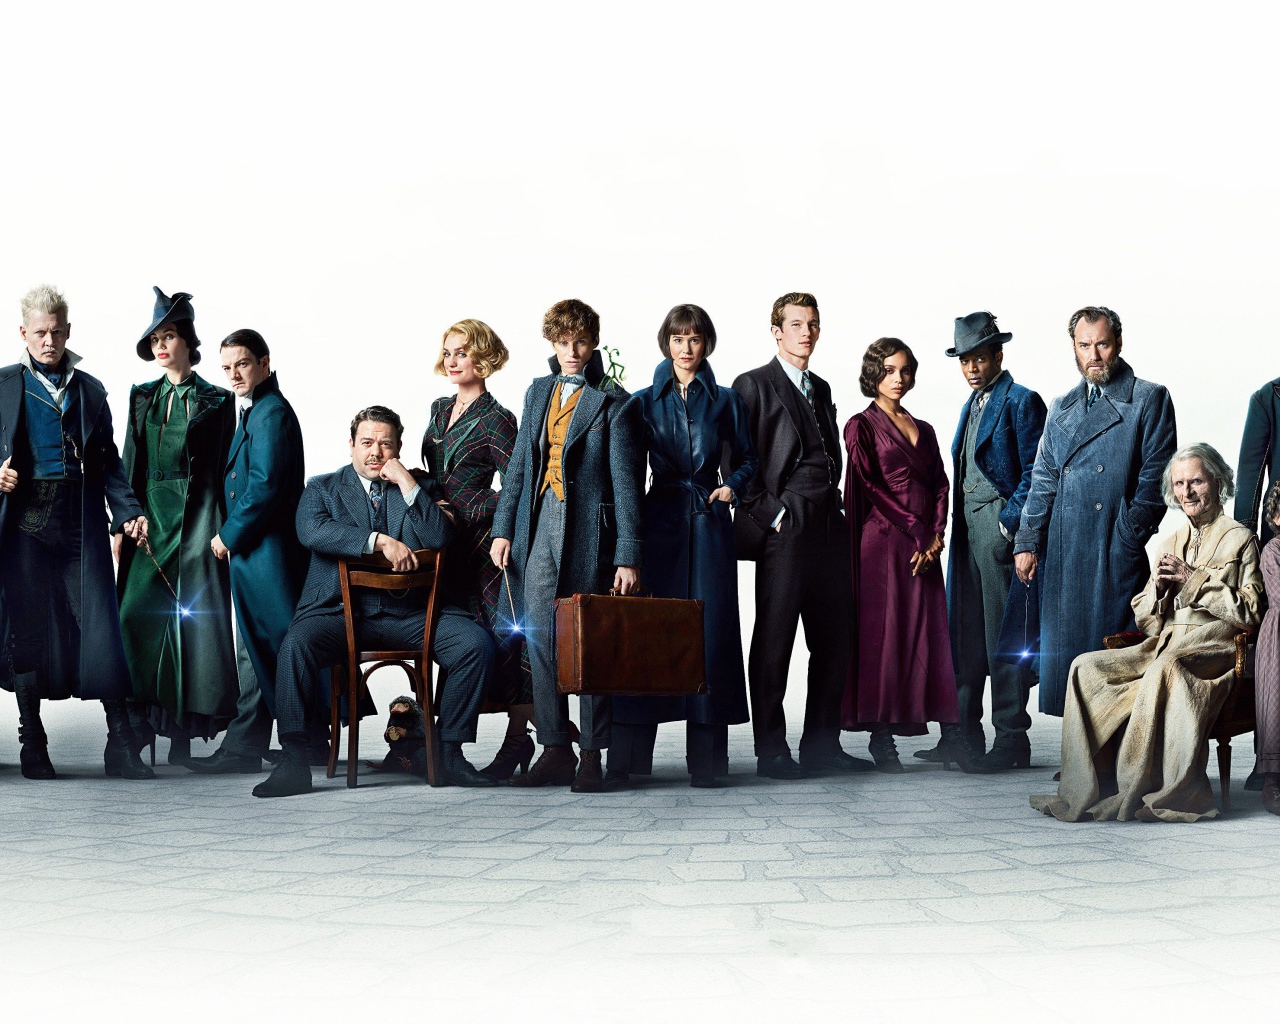 Heroes of the movie Fantastic Beasts: Crimes of Green de Wald